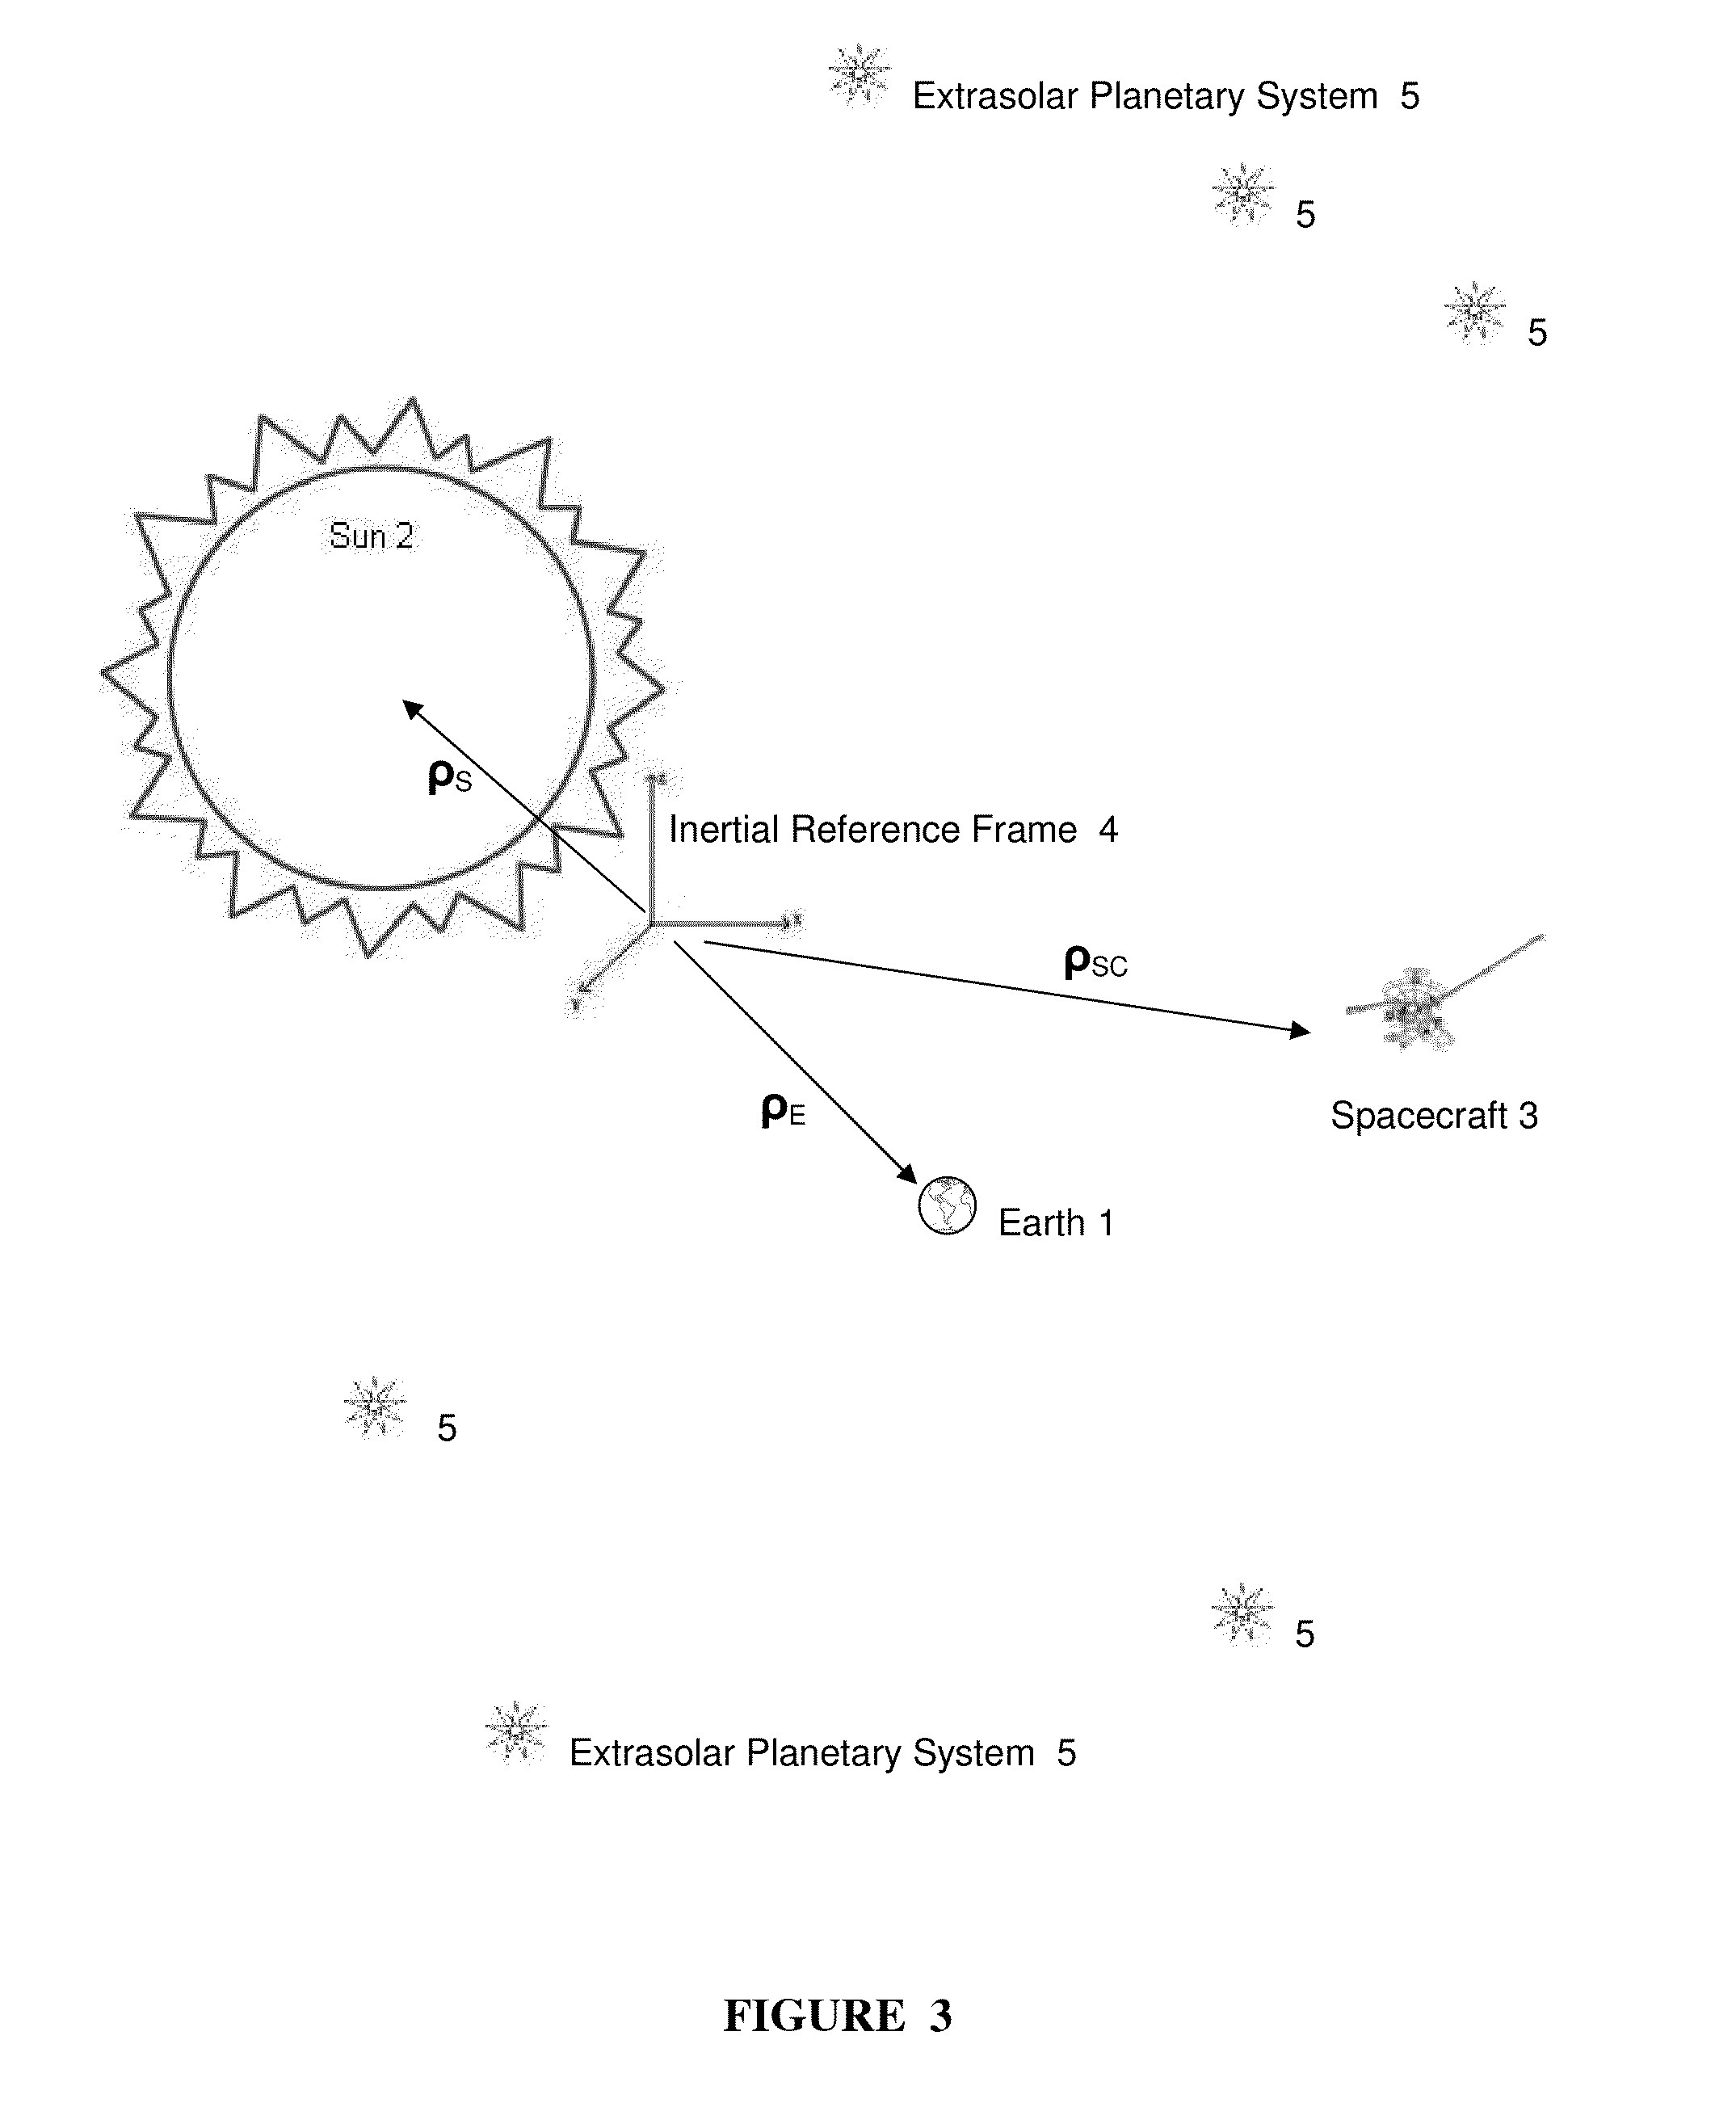 Apparatus, system and method for spacecraft navigation using extrasolar planetary systems